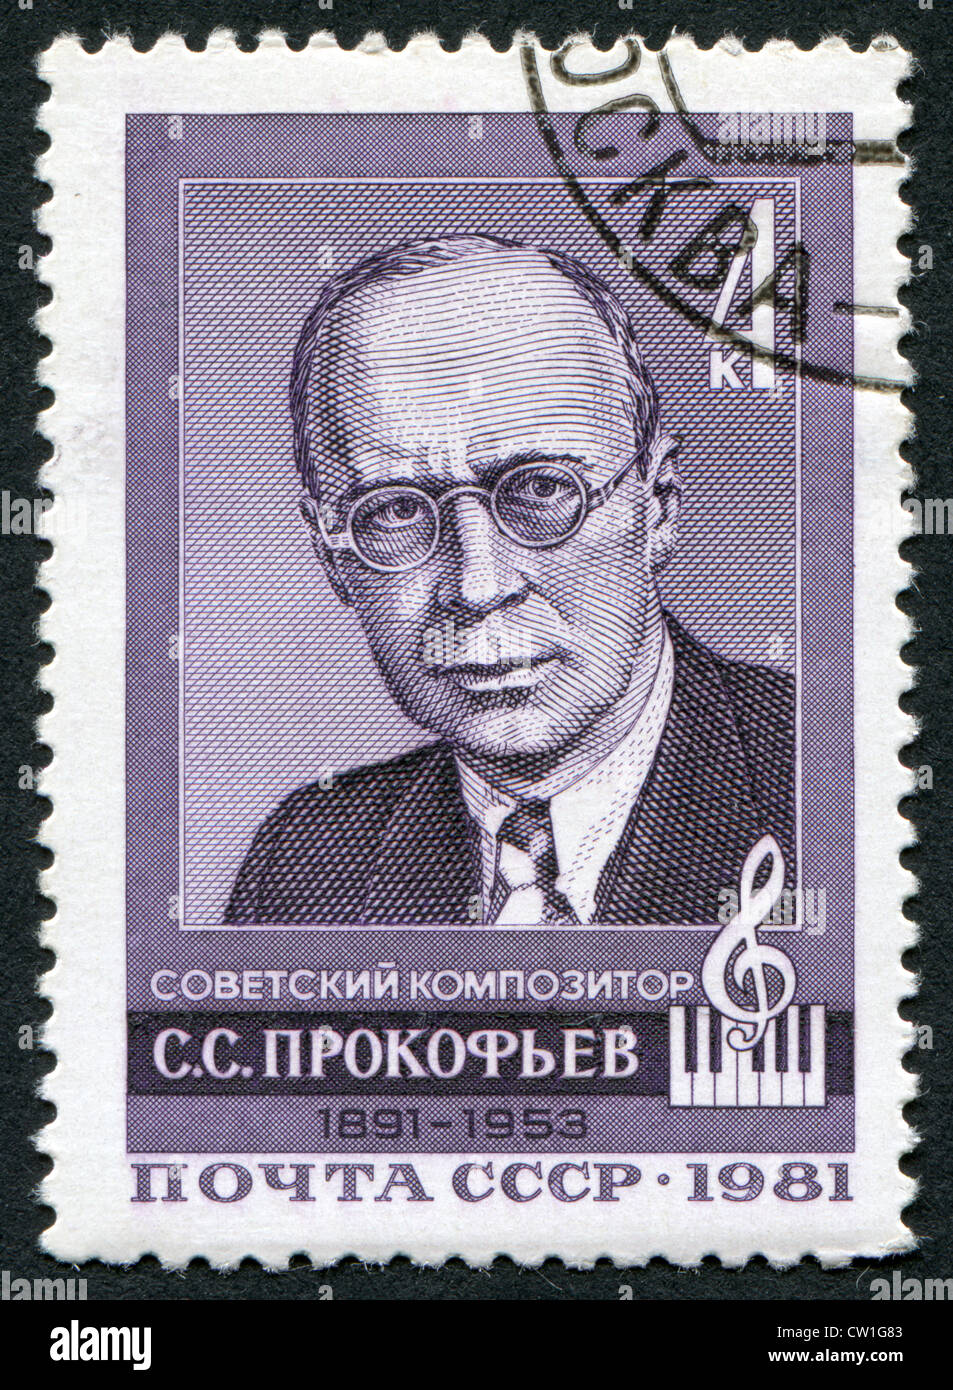 USSR-CIRCA 1981: A stamp printed in the USSR, shows Soviet composer S.S. Prokofiev, circa 1981 Stock Photo